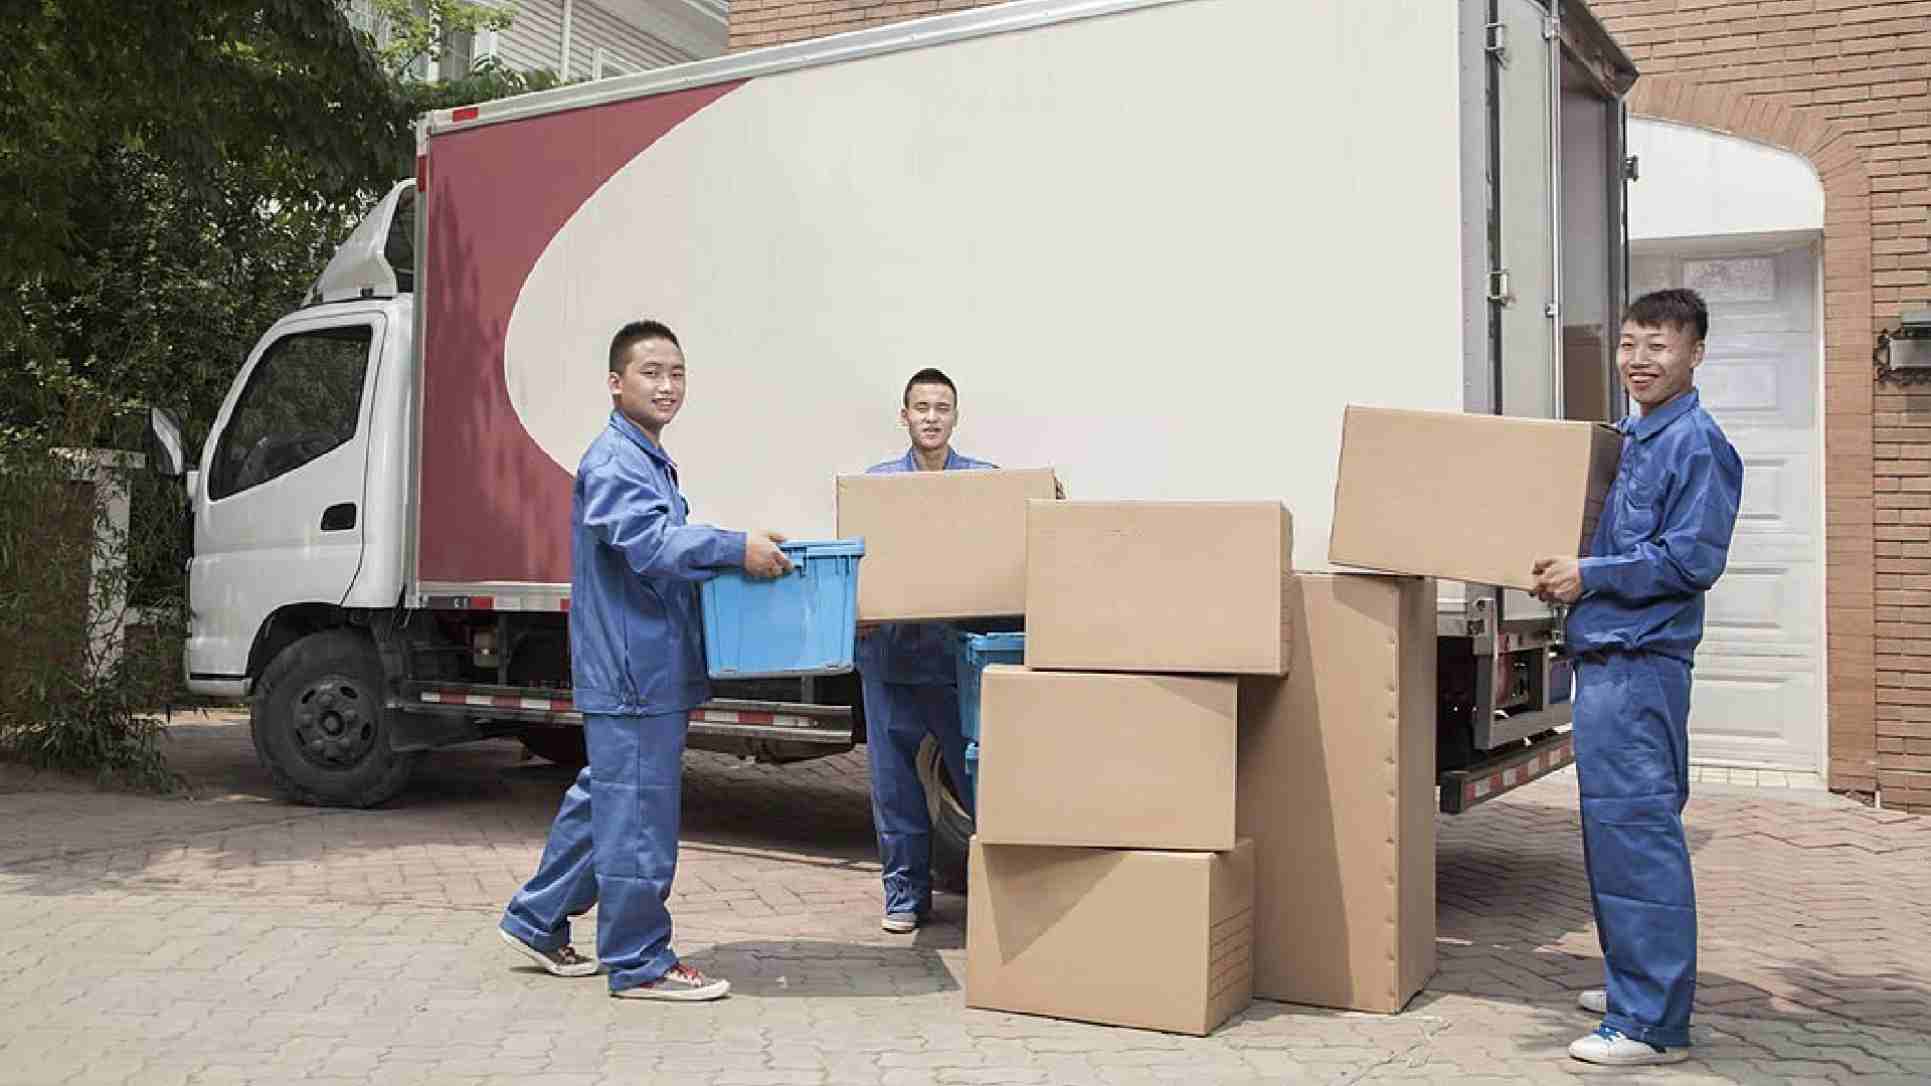 movers and packers in dubai silicon oasis 